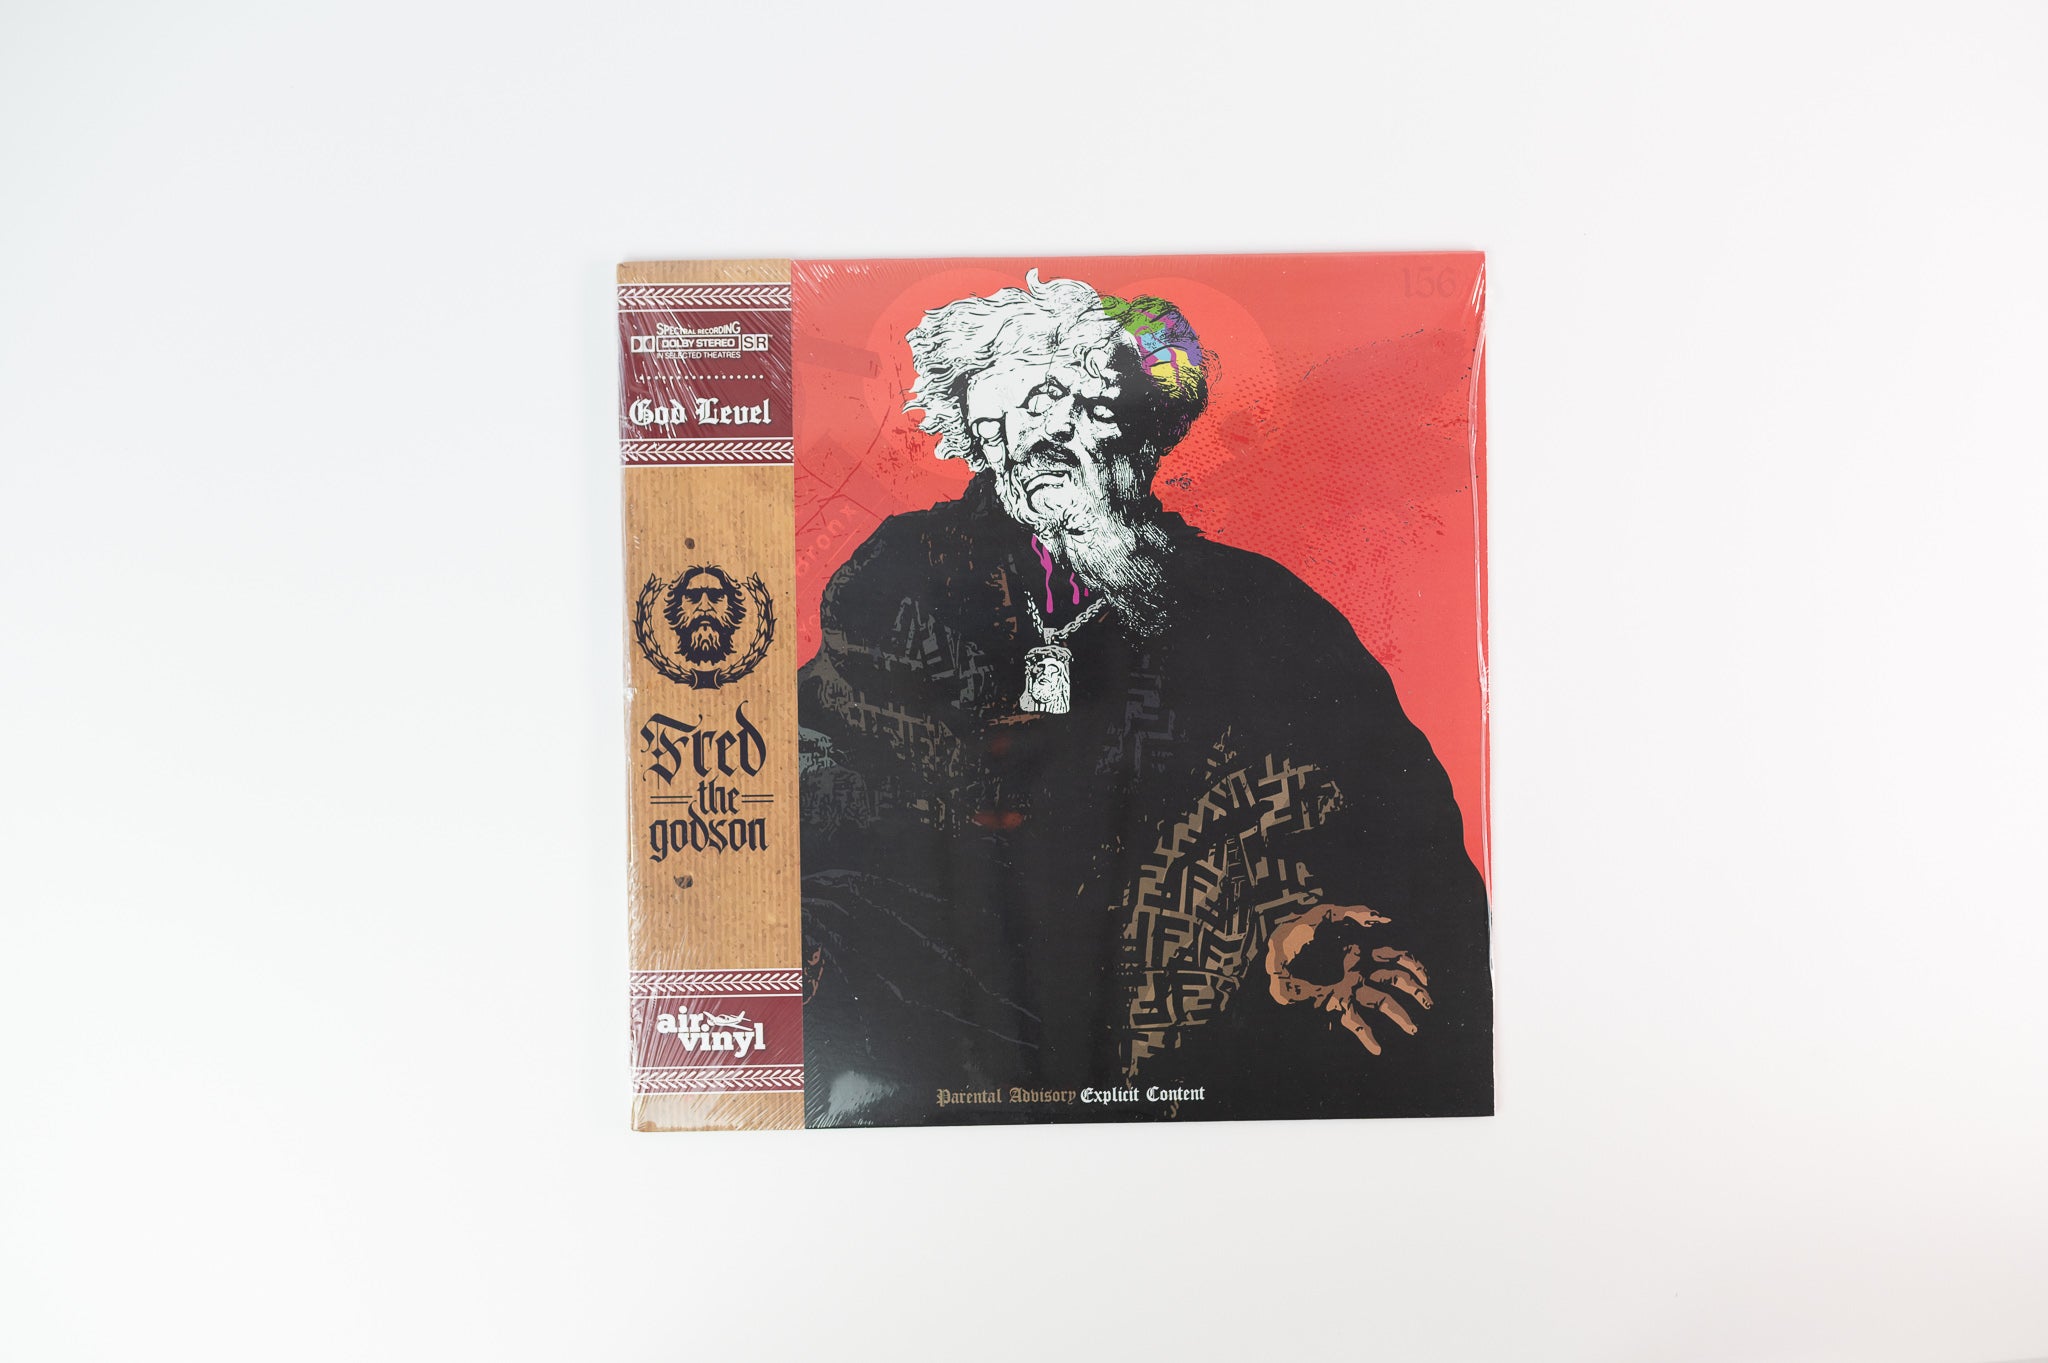 Fred The Godson - God Level on Air Vinyl Limited Red With Obi Sealed